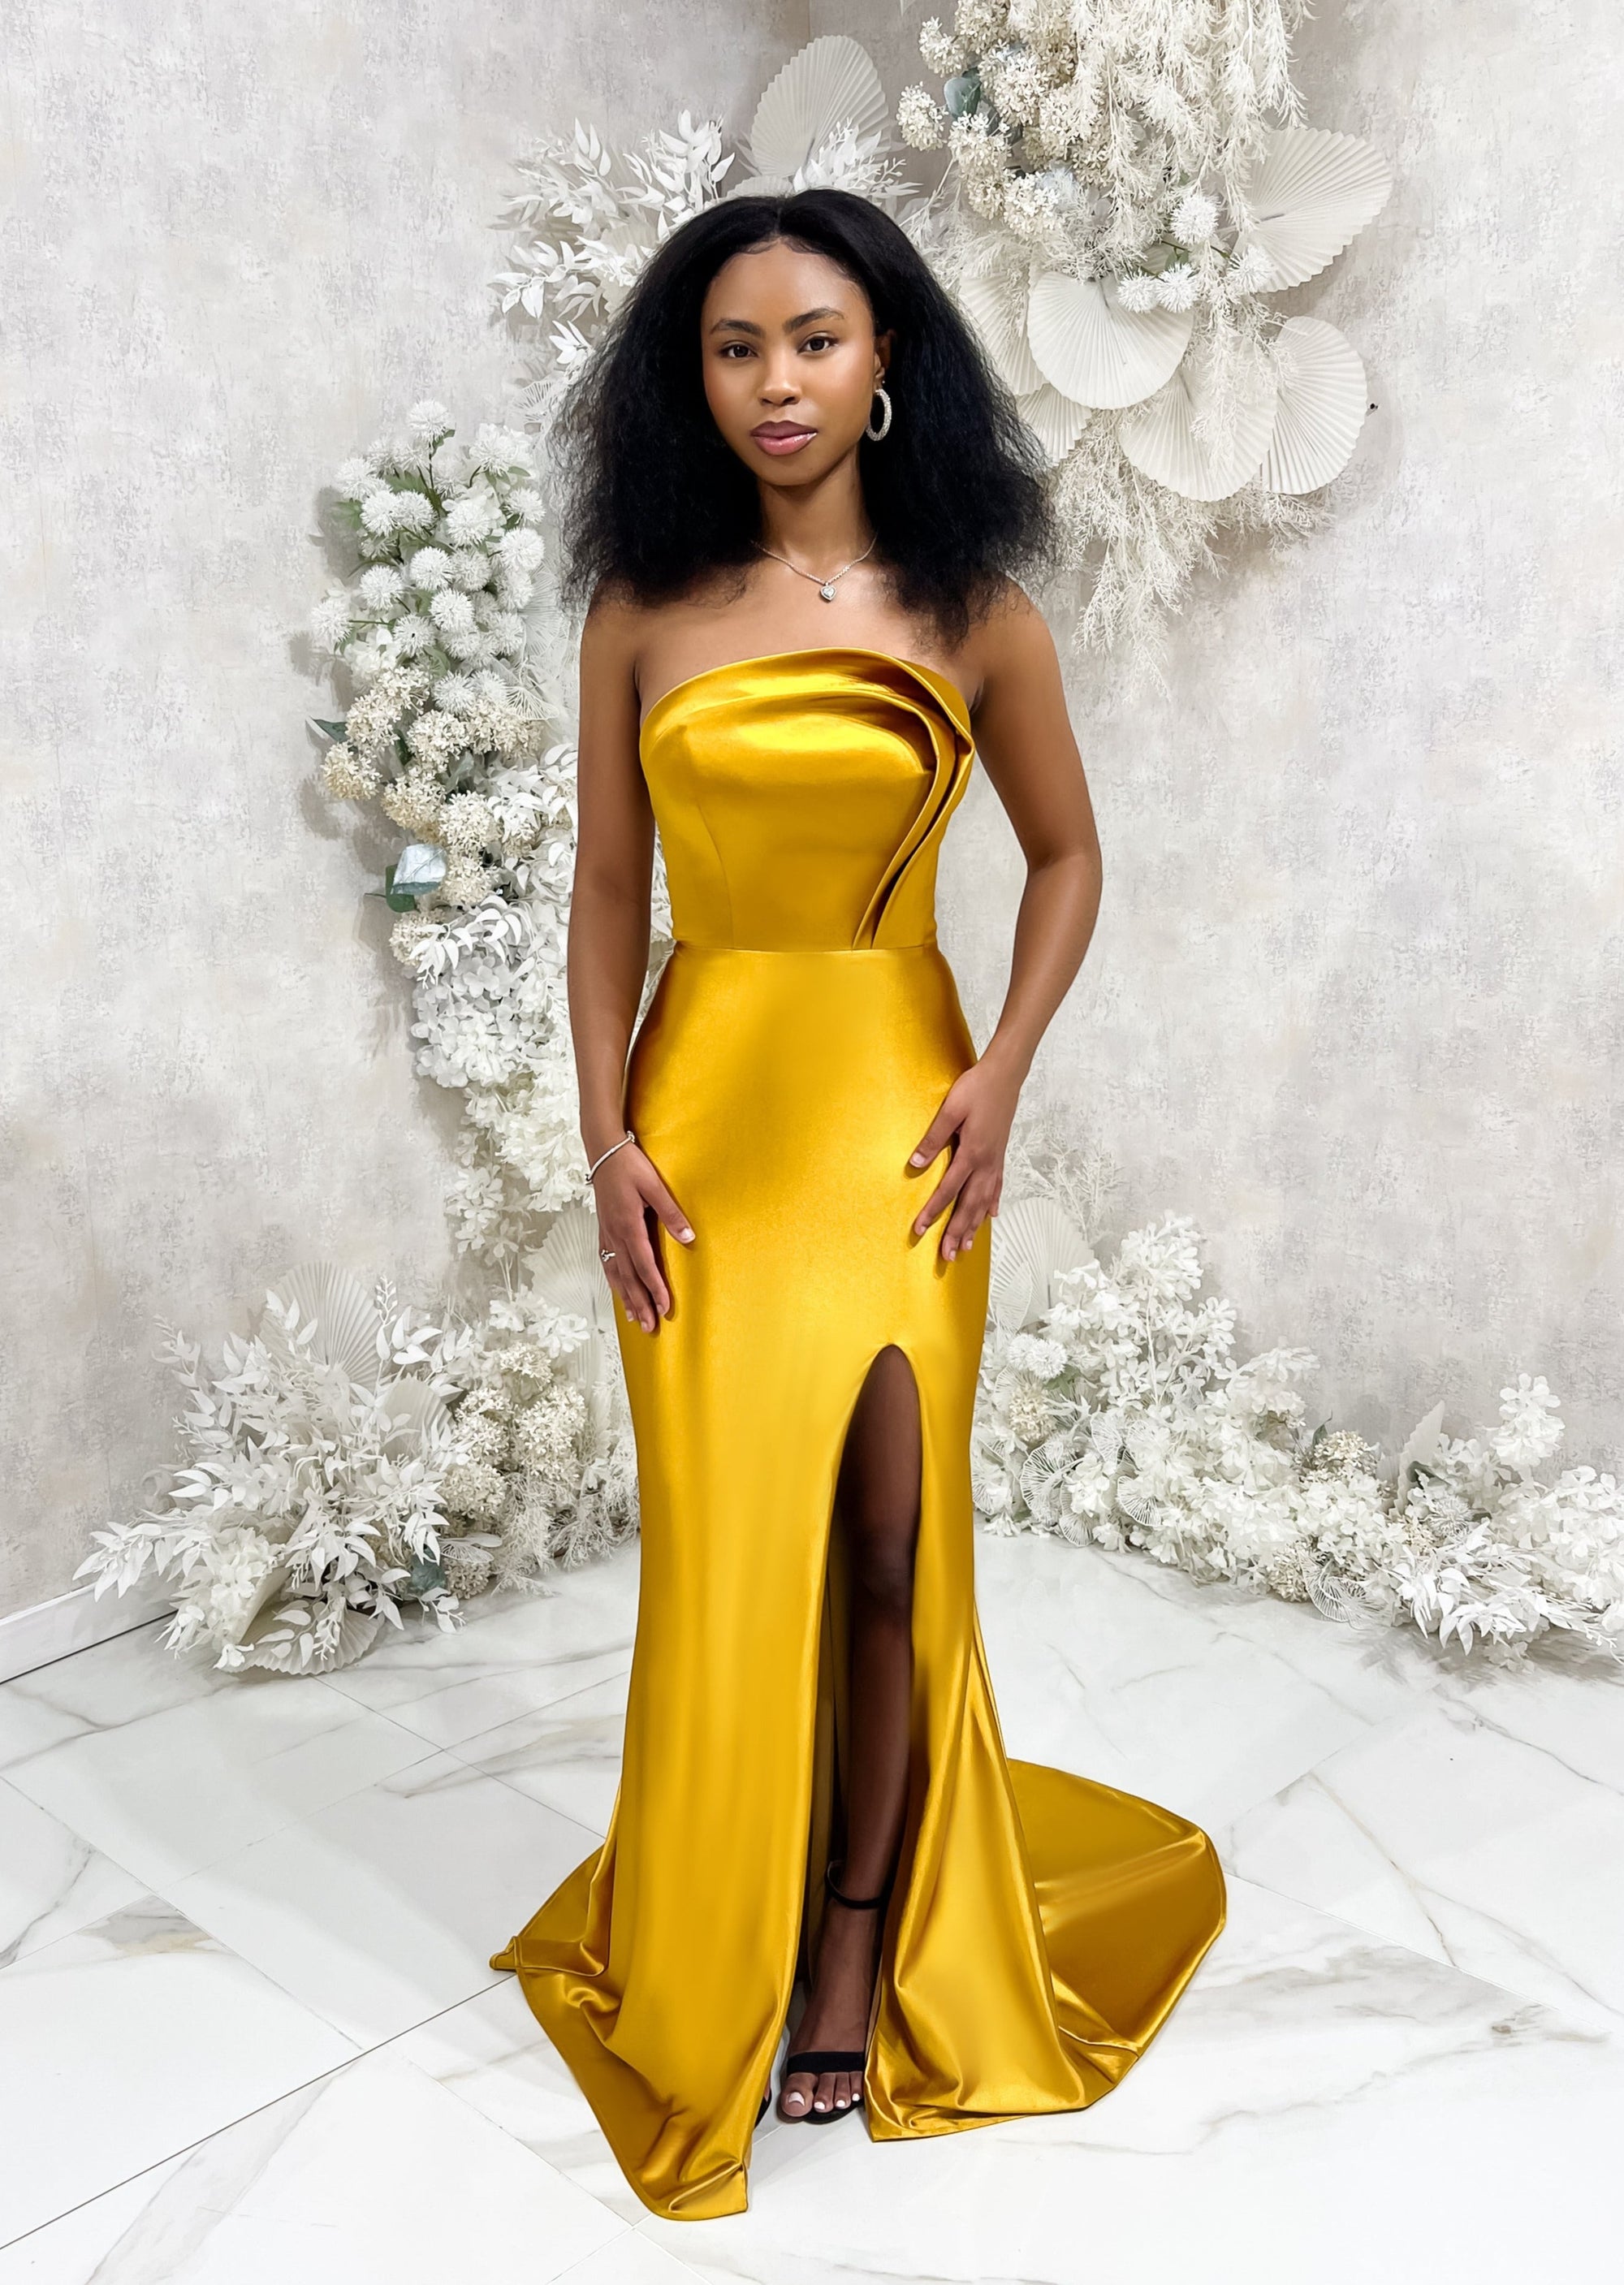 Bridesmaid wearing a modern strapless fitted bridesmaid dress with stretch. The dress has a slit at the leg, and curved architectural detailing at the neck, and is shown in a golden vibrant yellow on a black model.